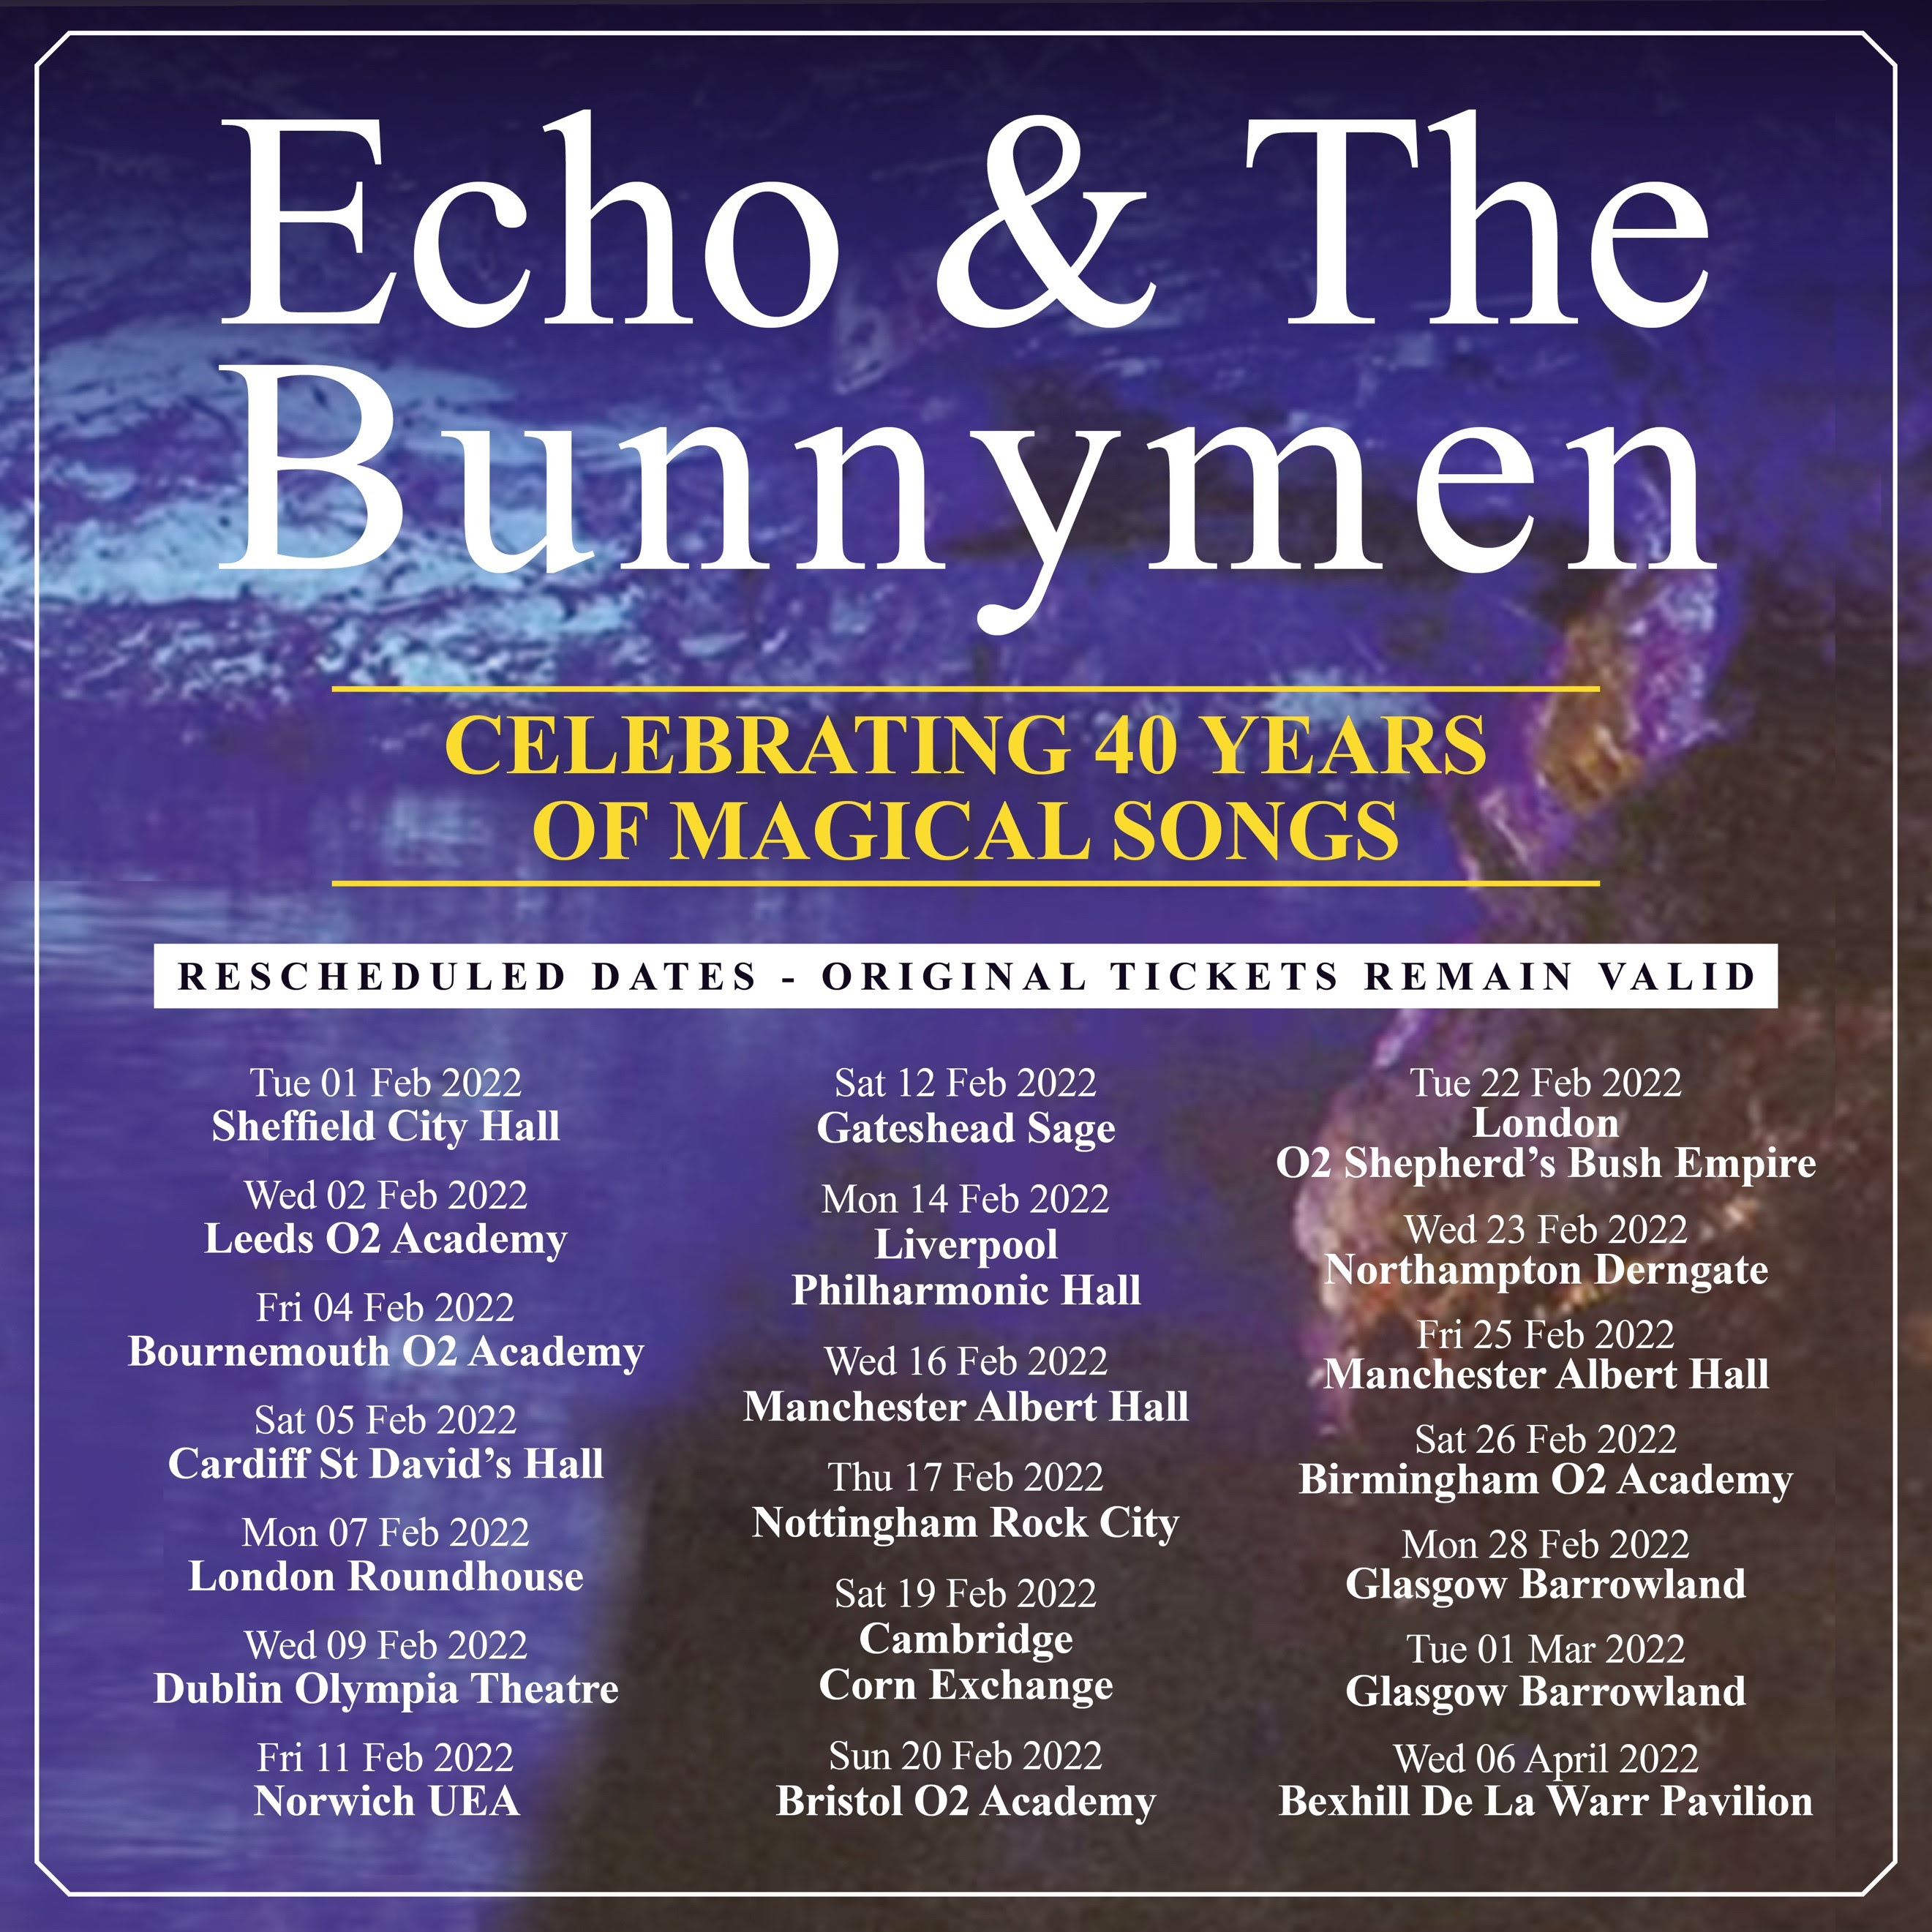 echo and the bunnymen tour uk